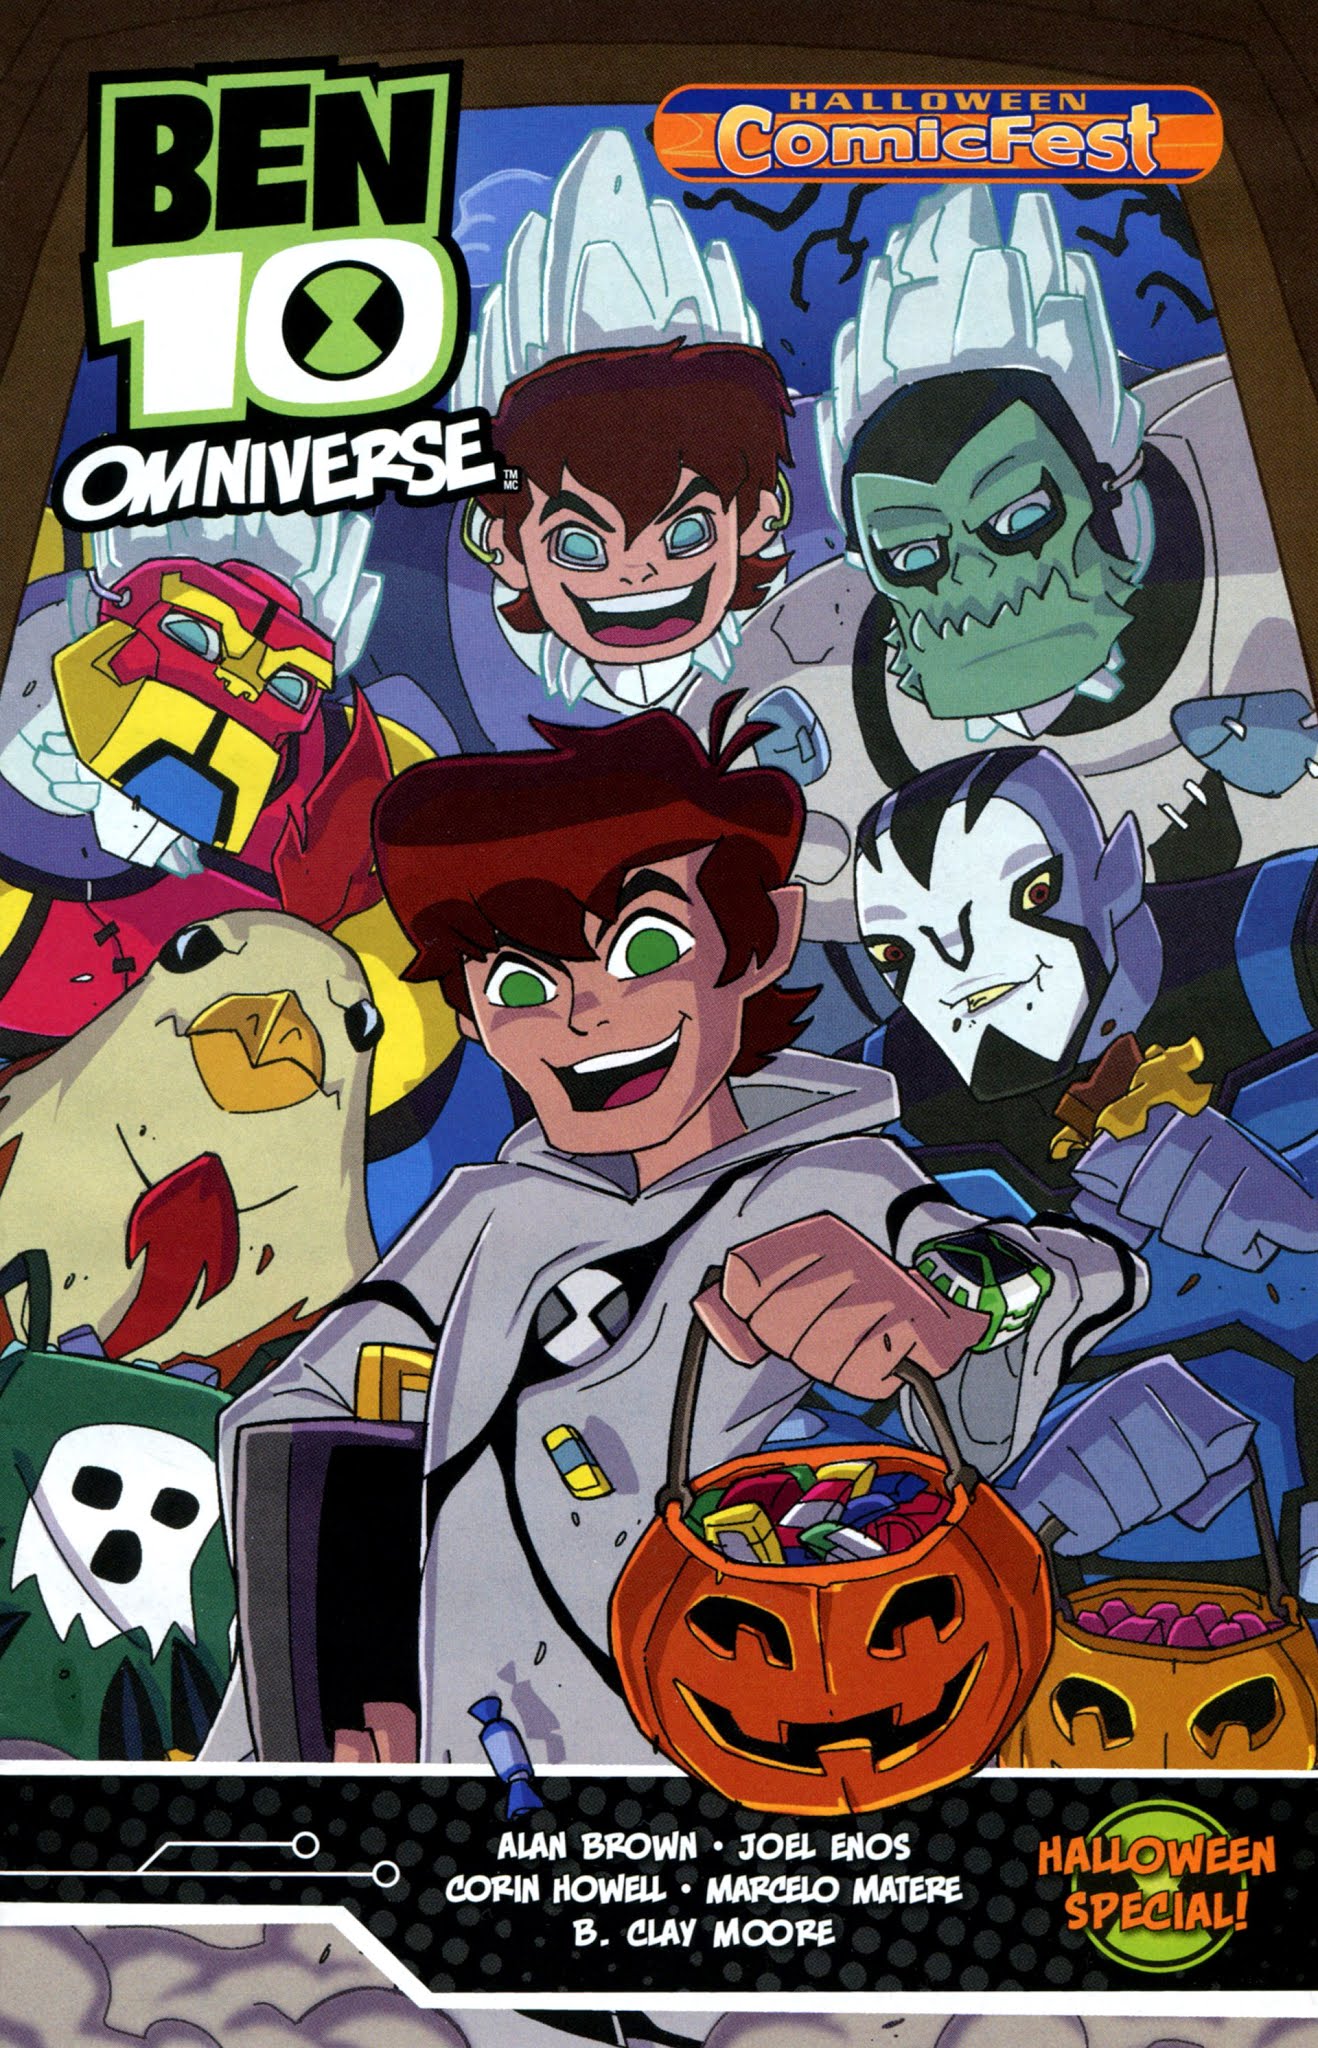 Ben 10 Shemale Porn Captions - Ben 10 Omniverse Halloween Special Full | Read Ben 10 Omniverse Halloween  Special Full comic online in high quality. Read Full Comic online for free  - Read comics online in high quality .